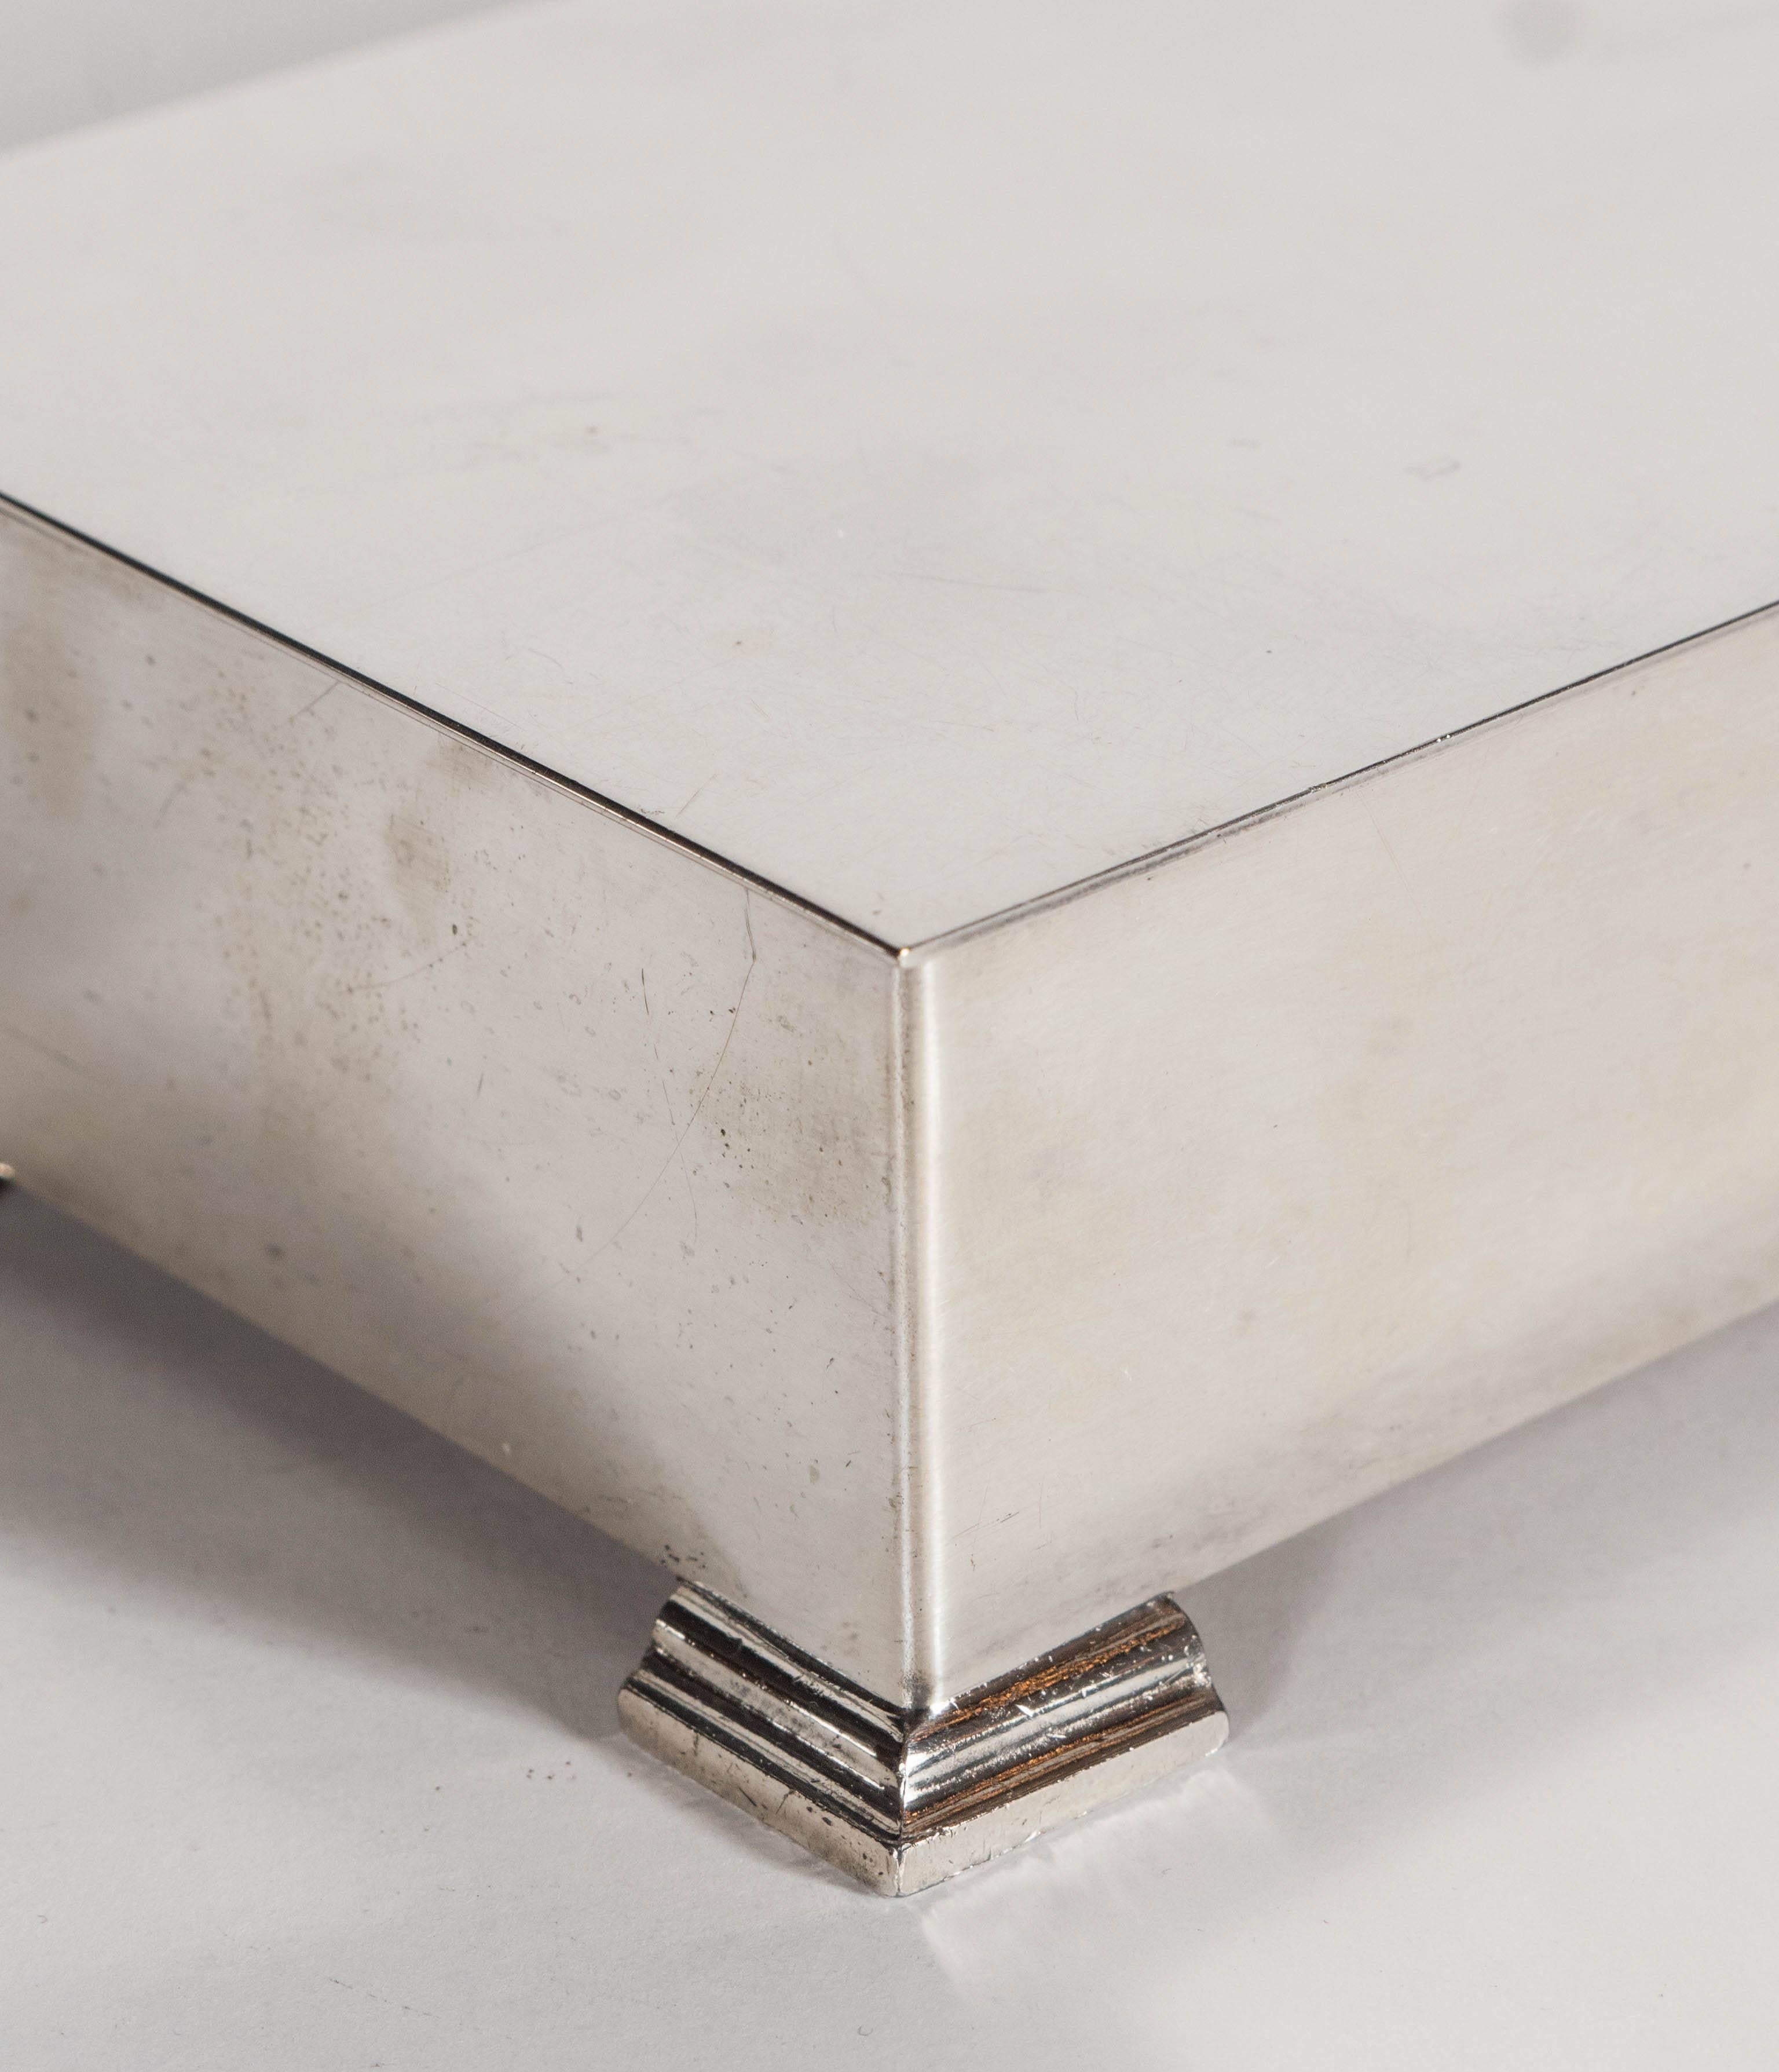 A very elegant art deco silver plated box with four skyscraper-style slightly protruding feet and a flat, hinged top. The interior is lined with thin cedar planks and a divider. A perfect piece to store jewelry, playing cards, keys or smaller